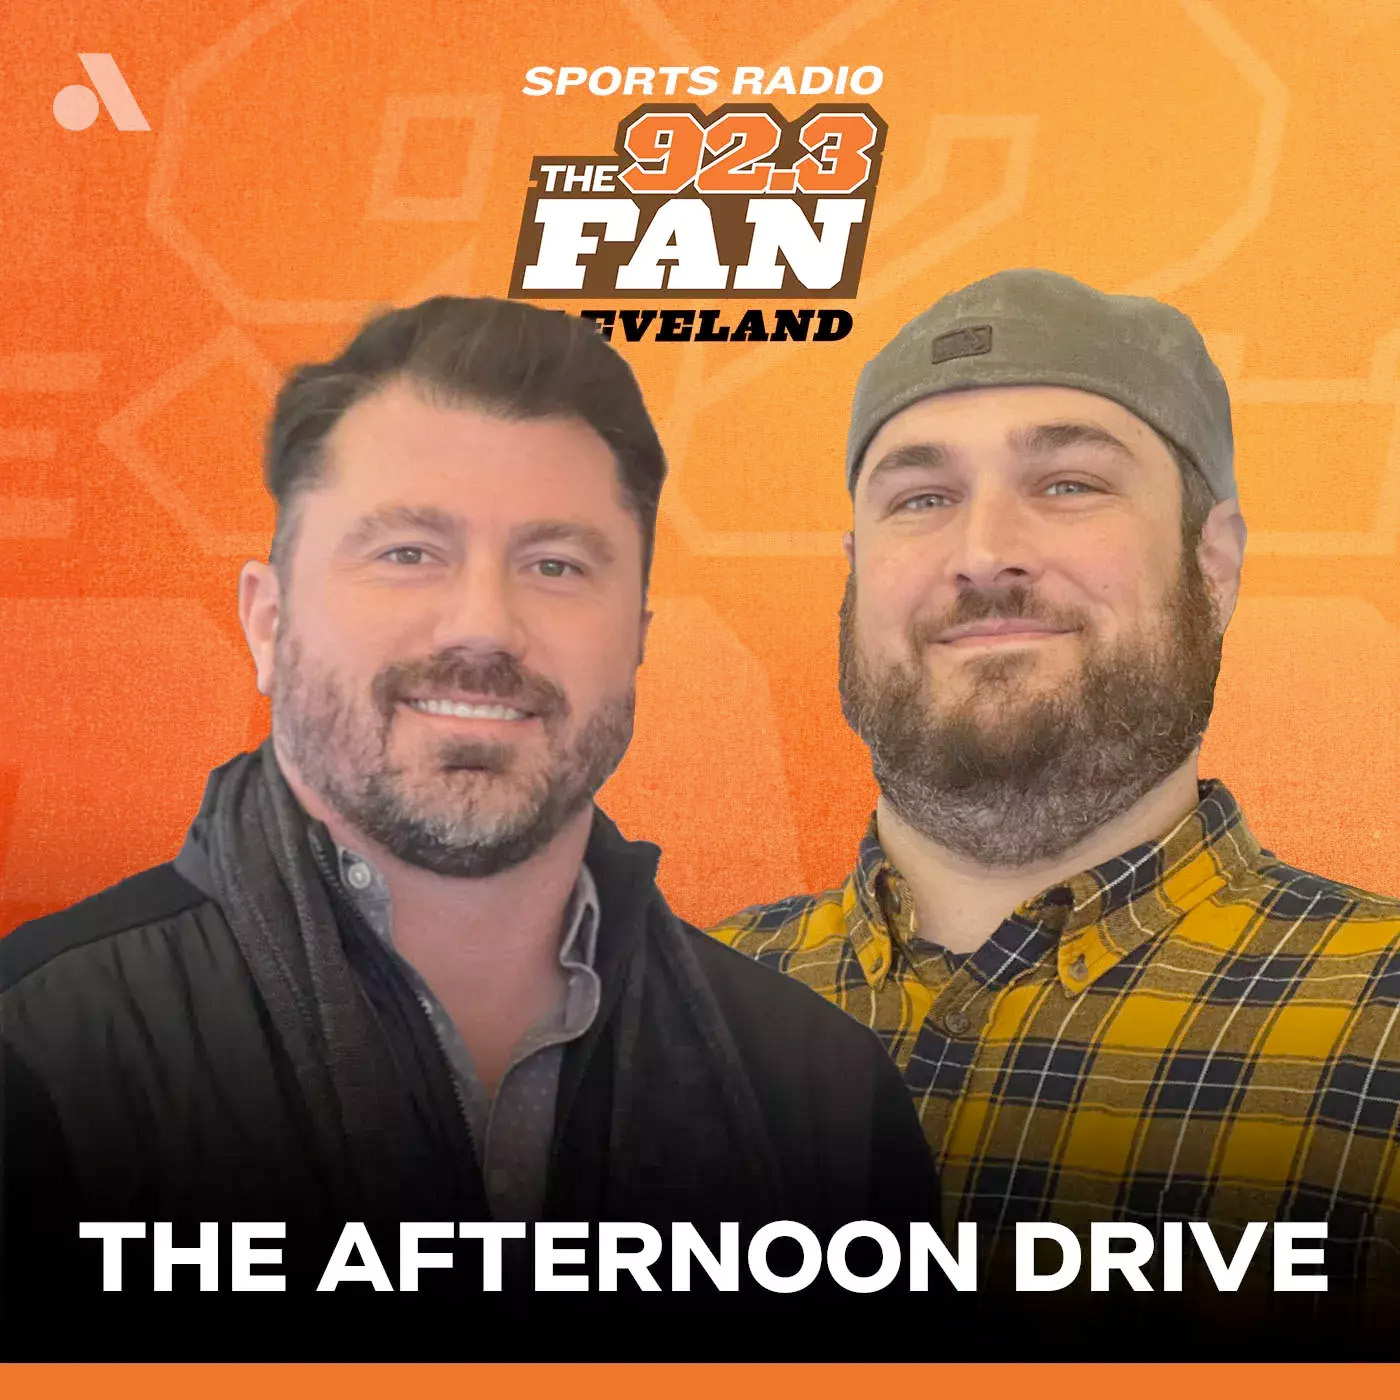 Hour 4: Cavs-Magic Game 5 ticket price might surprise + more details emerge on Browns' stadium proposal + team picks up Greg Newsome II's 5th-year option